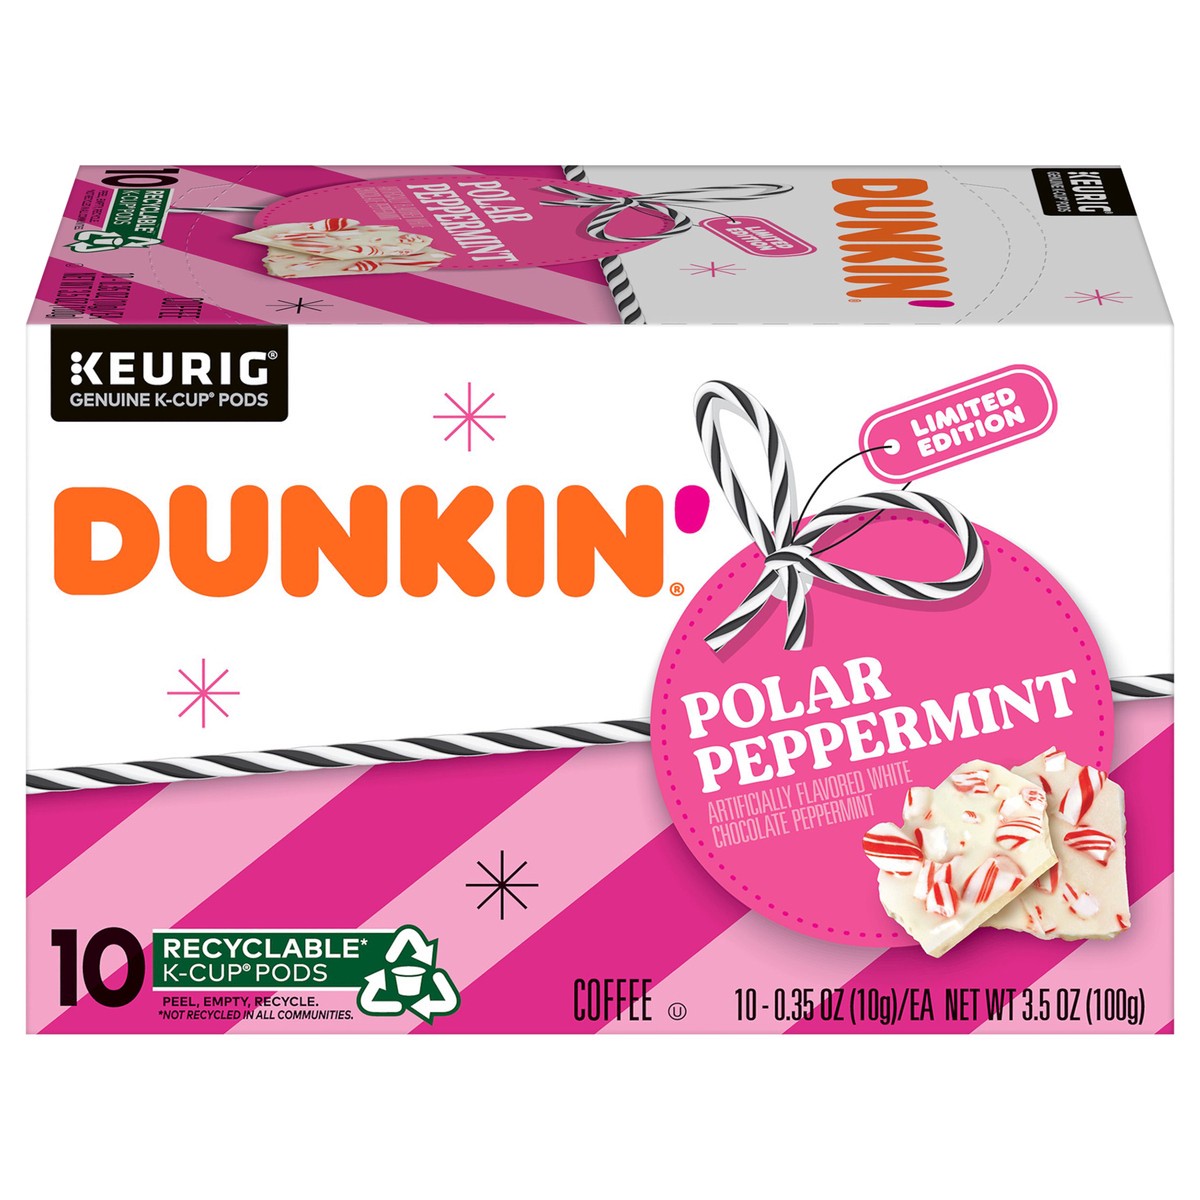 slide 9 of 9, Dunkin' Dunkin Polar Peppermint, Limited Edition Holiday Coffee K-CUP /, 3.7 oz